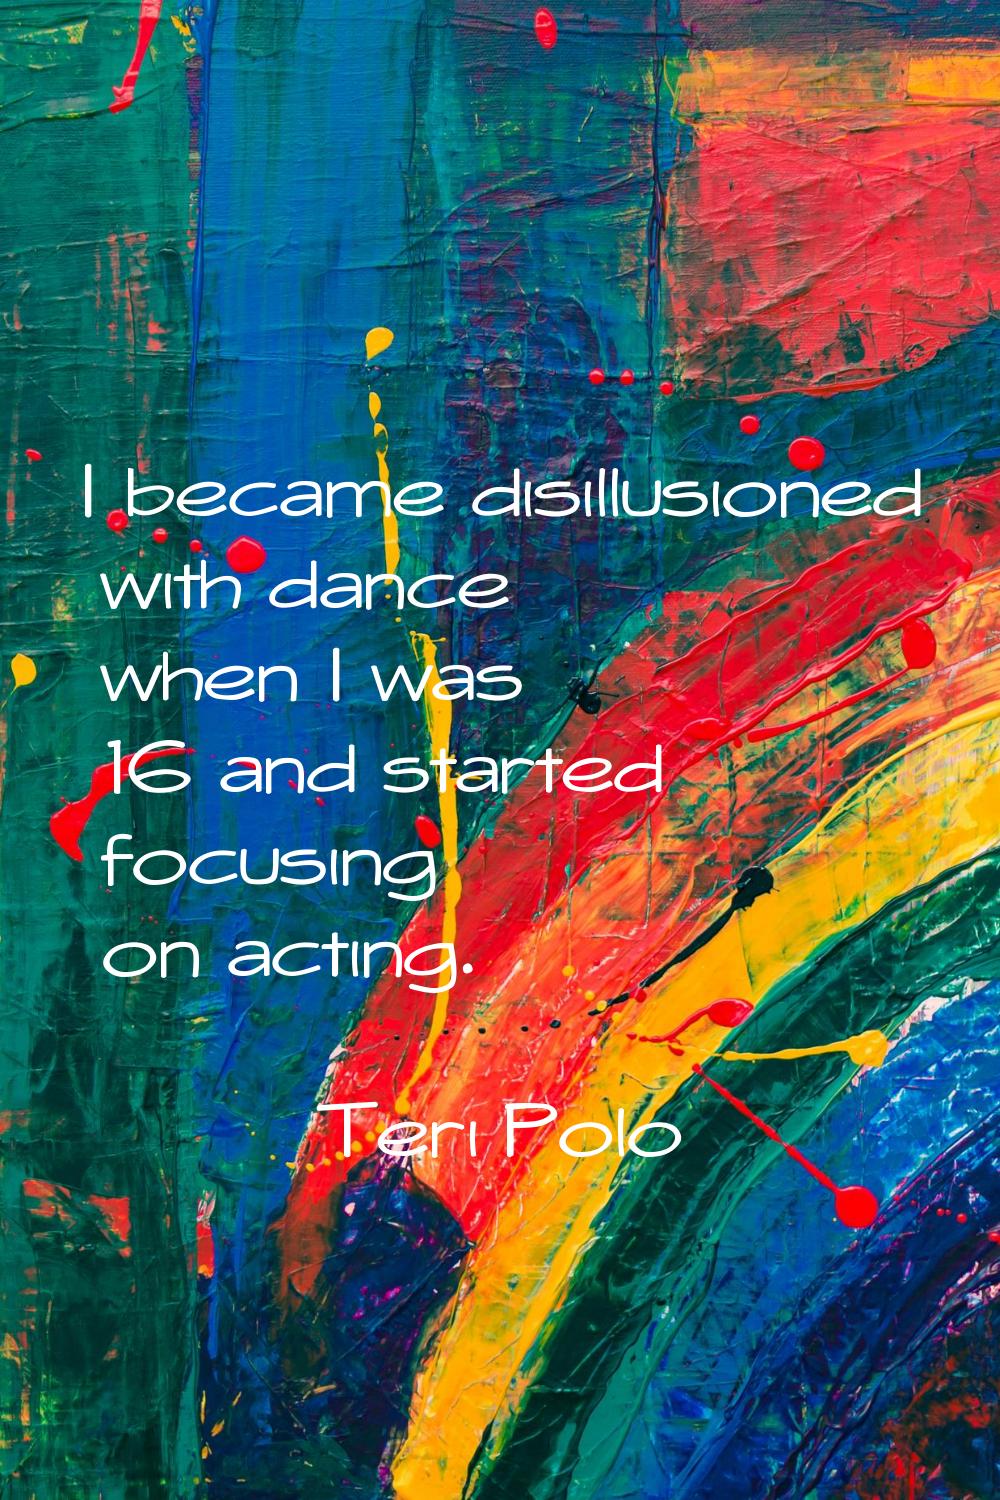 I became disillusioned with dance when I was 16 and started focusing on acting.